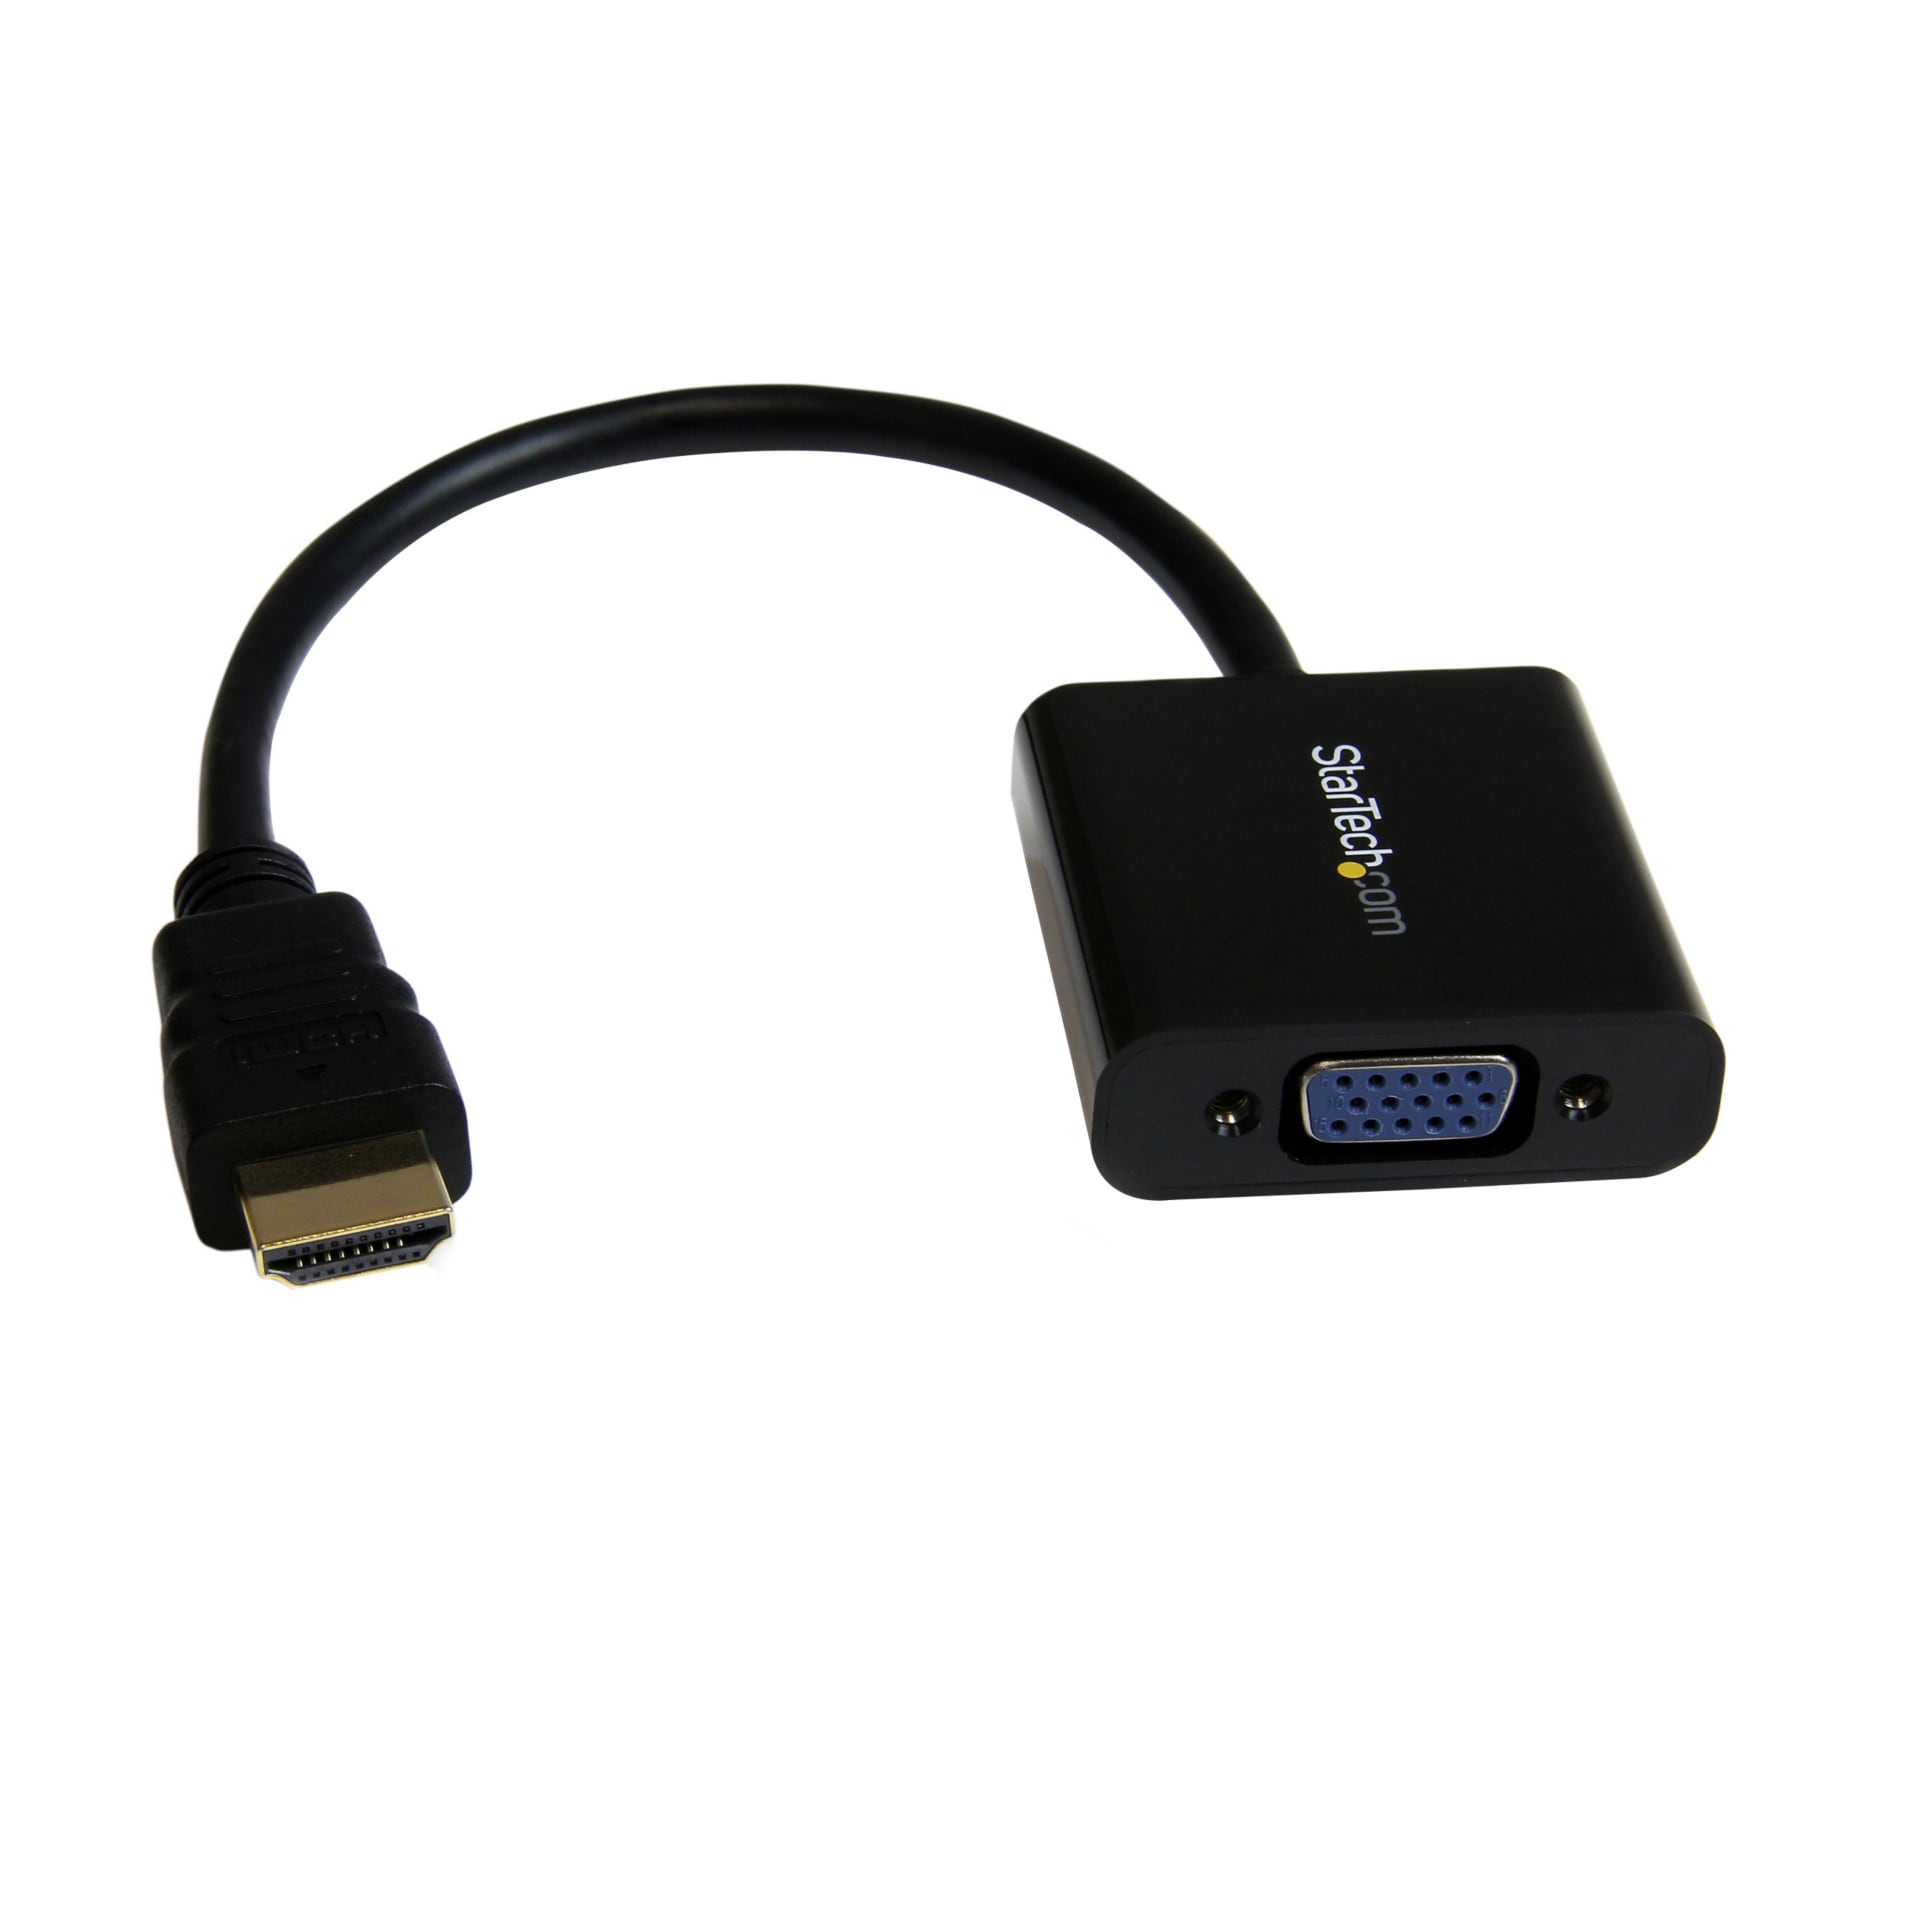 Anoi kook een maaltijd Zuidwest StarTech.com HDMI to VGA Adapter - Active Monitor Converter Cable - 1080p -  HD2VGAE2 - Monitor Cables & Adapters - CDW.com